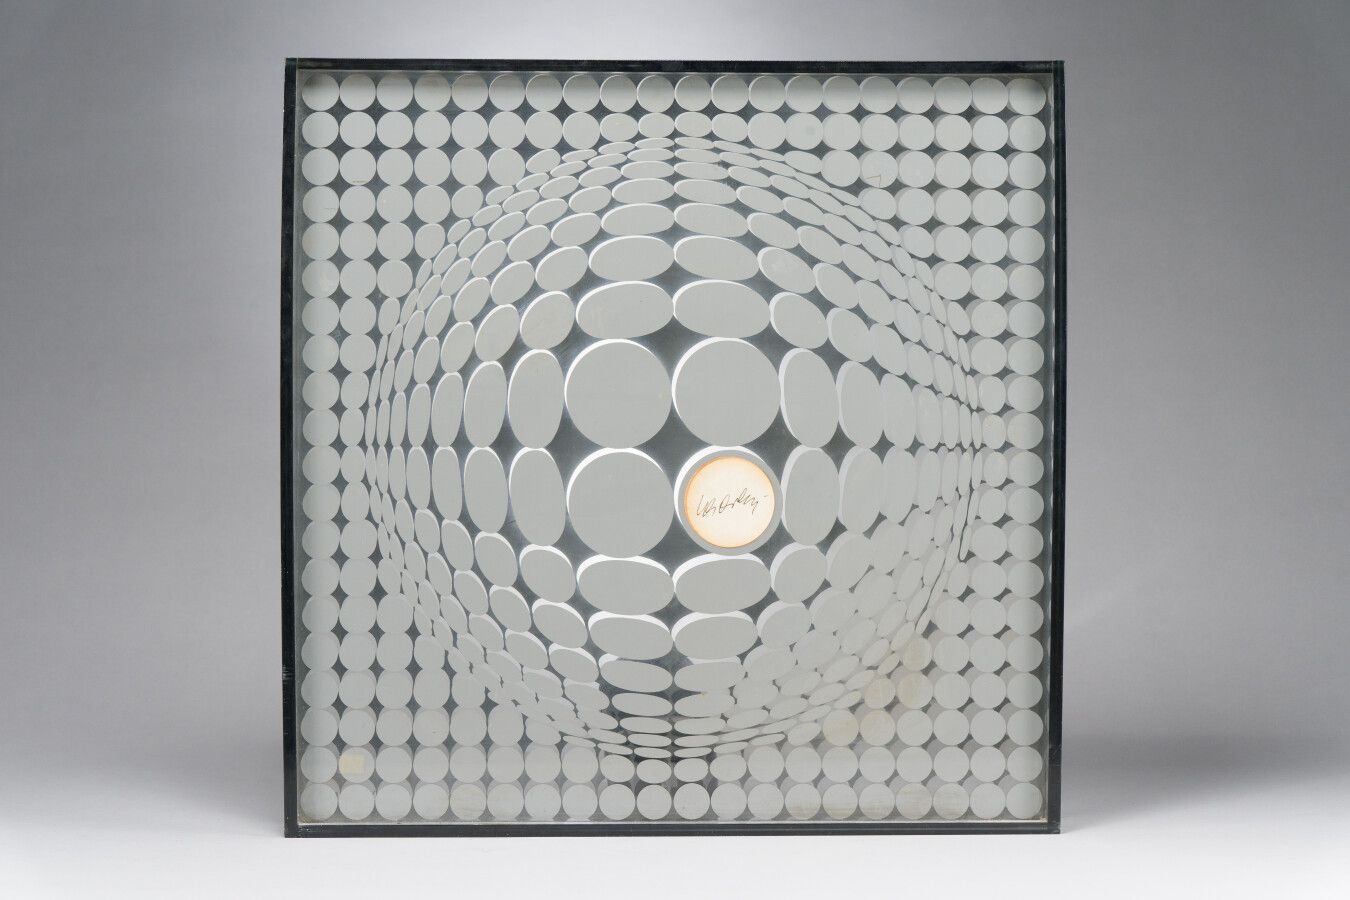 Null 57. Victor VASARELY (1906 - 1997)

VEGA MIR (from the album Bach), 1973

Pa&hellip;